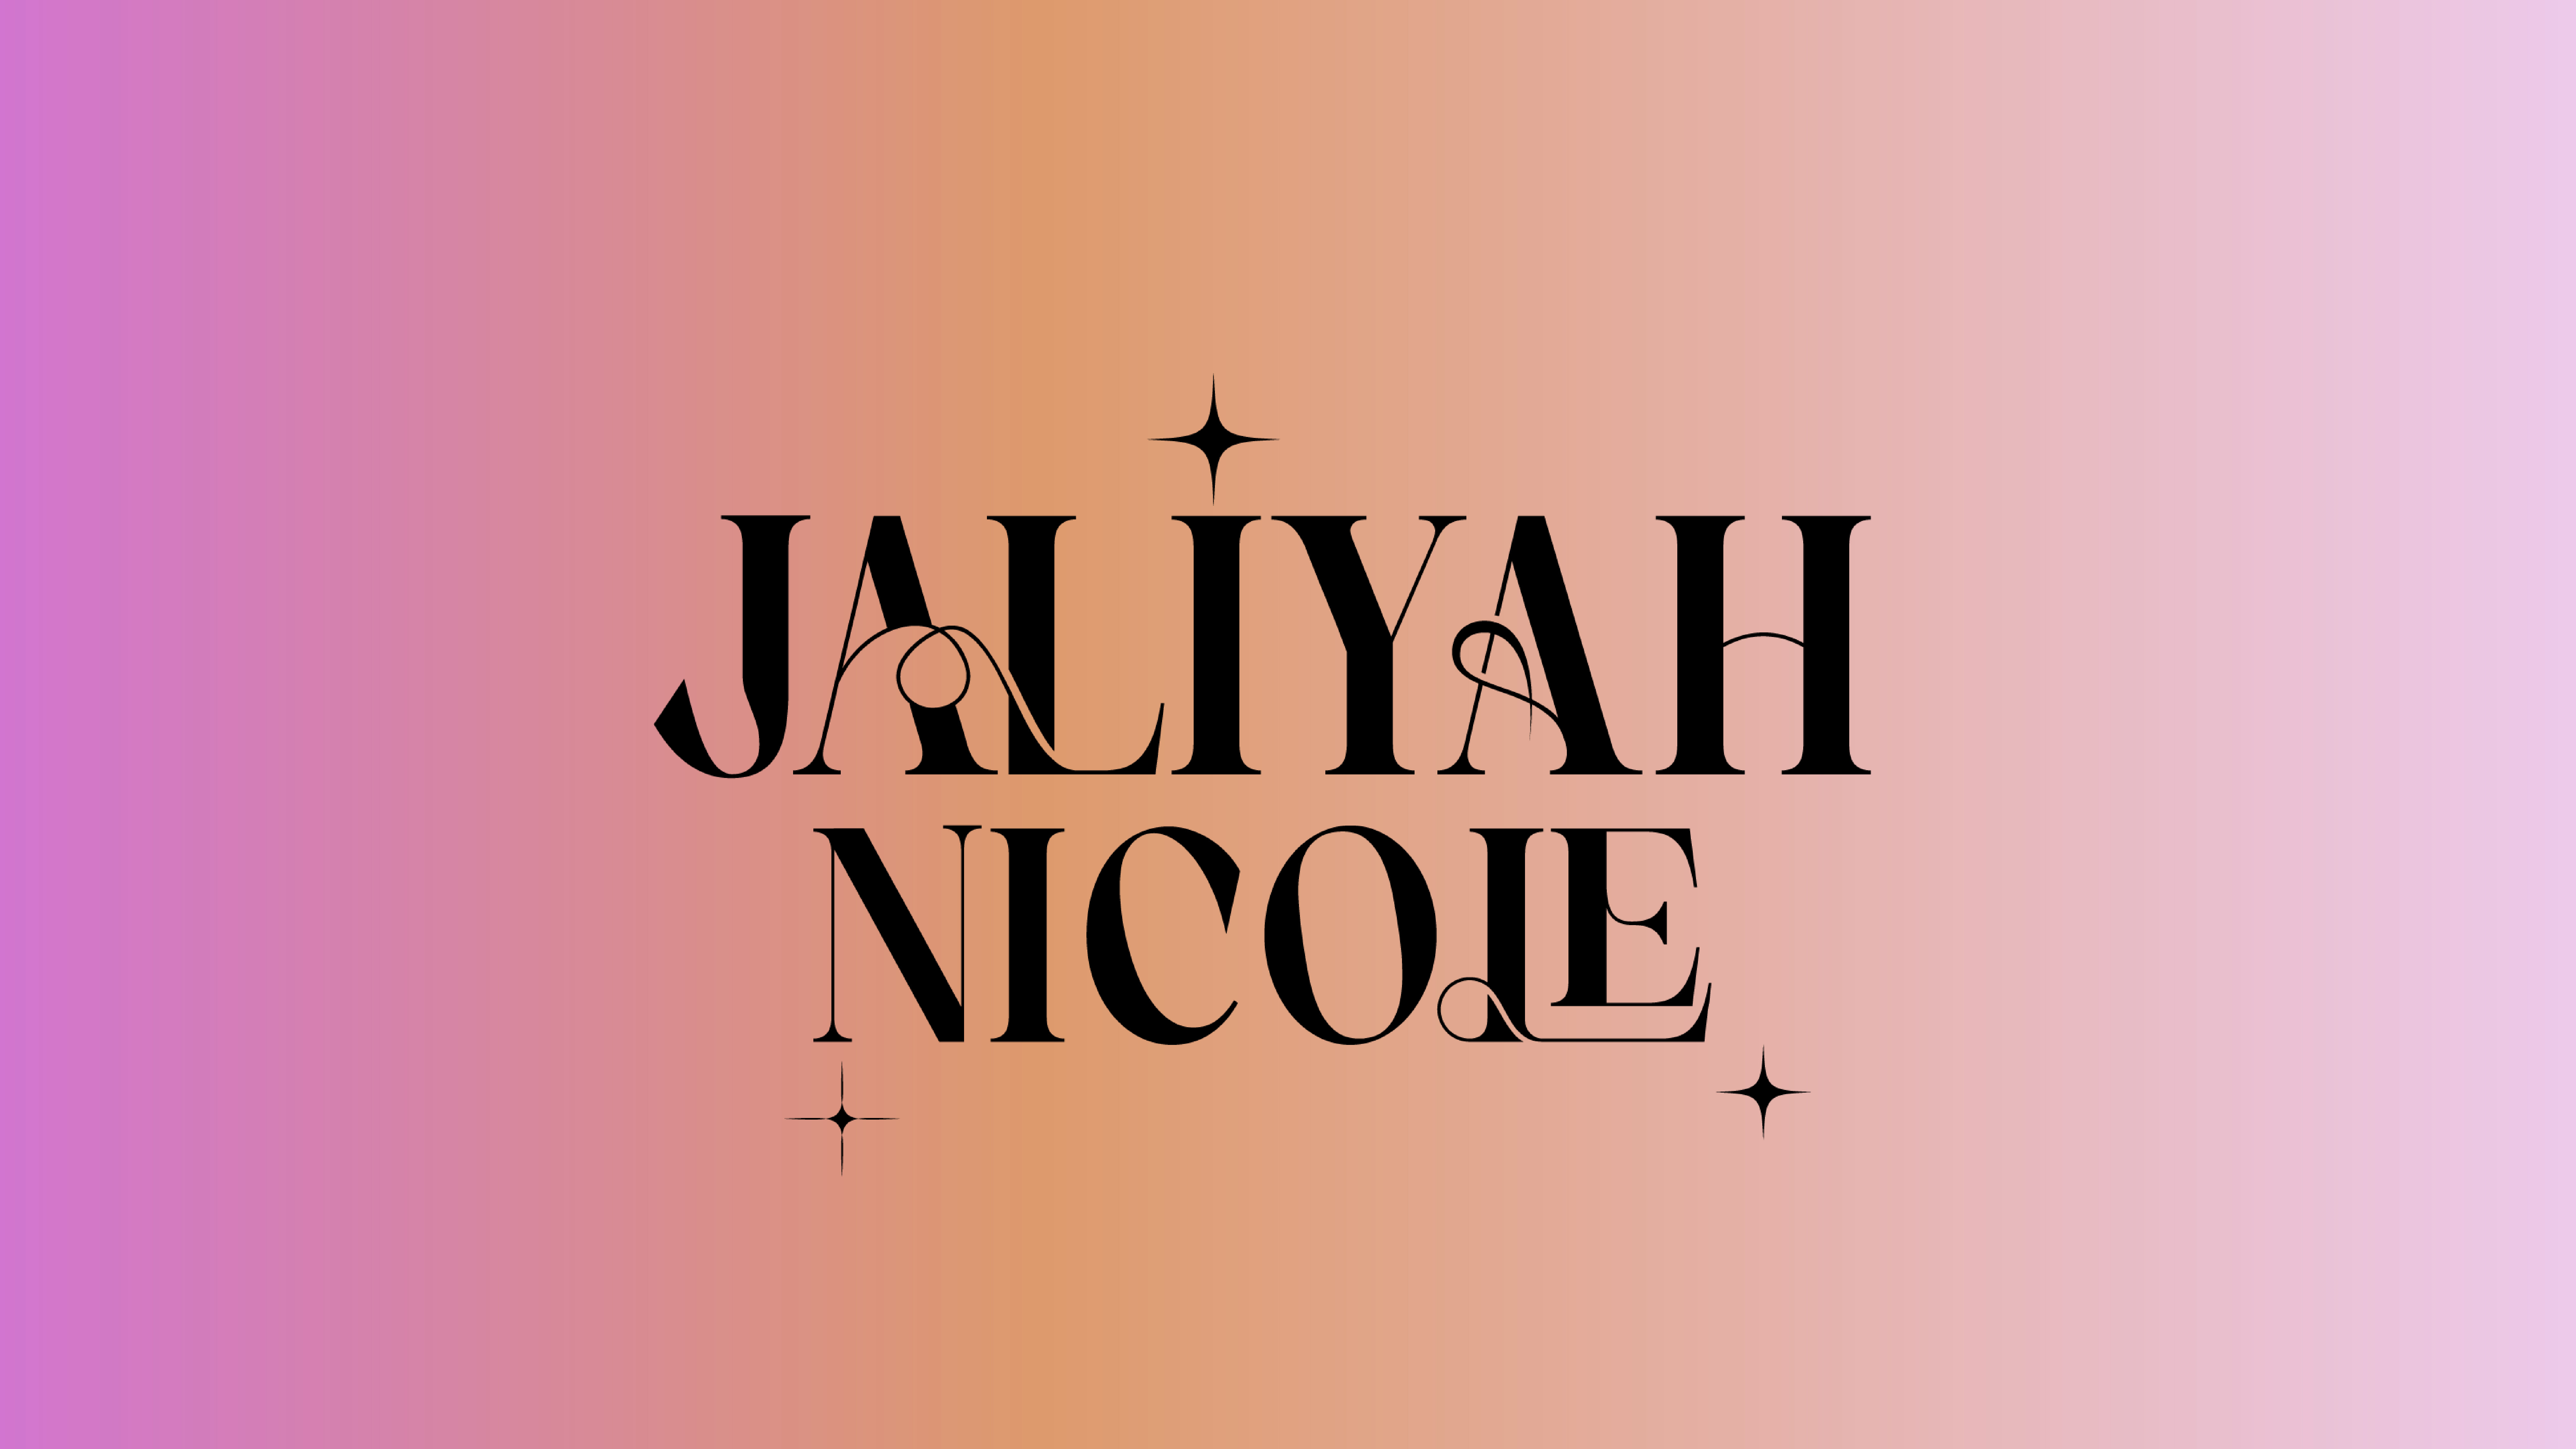 Jaliyah Nicole / "Jaliyah Nicole" is my brand name, which consists of my first and middle name. I wanted to use my first and middle names because they will never change, and I wanted a consistent brand name that is true to me. 